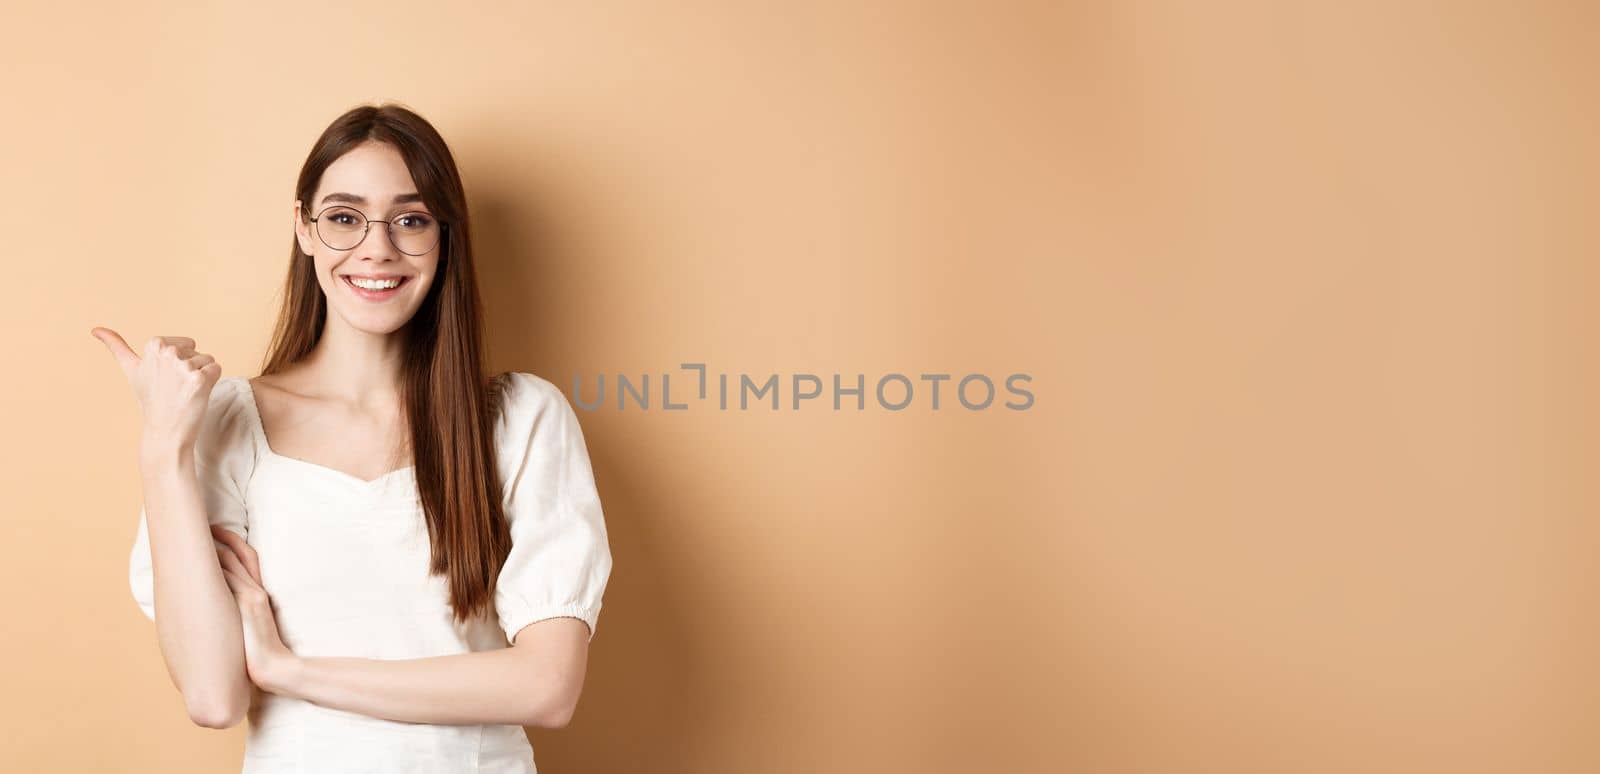 Cheerful woman in eyewear pointing finger left at logo, smiling happy, standing on beige background.